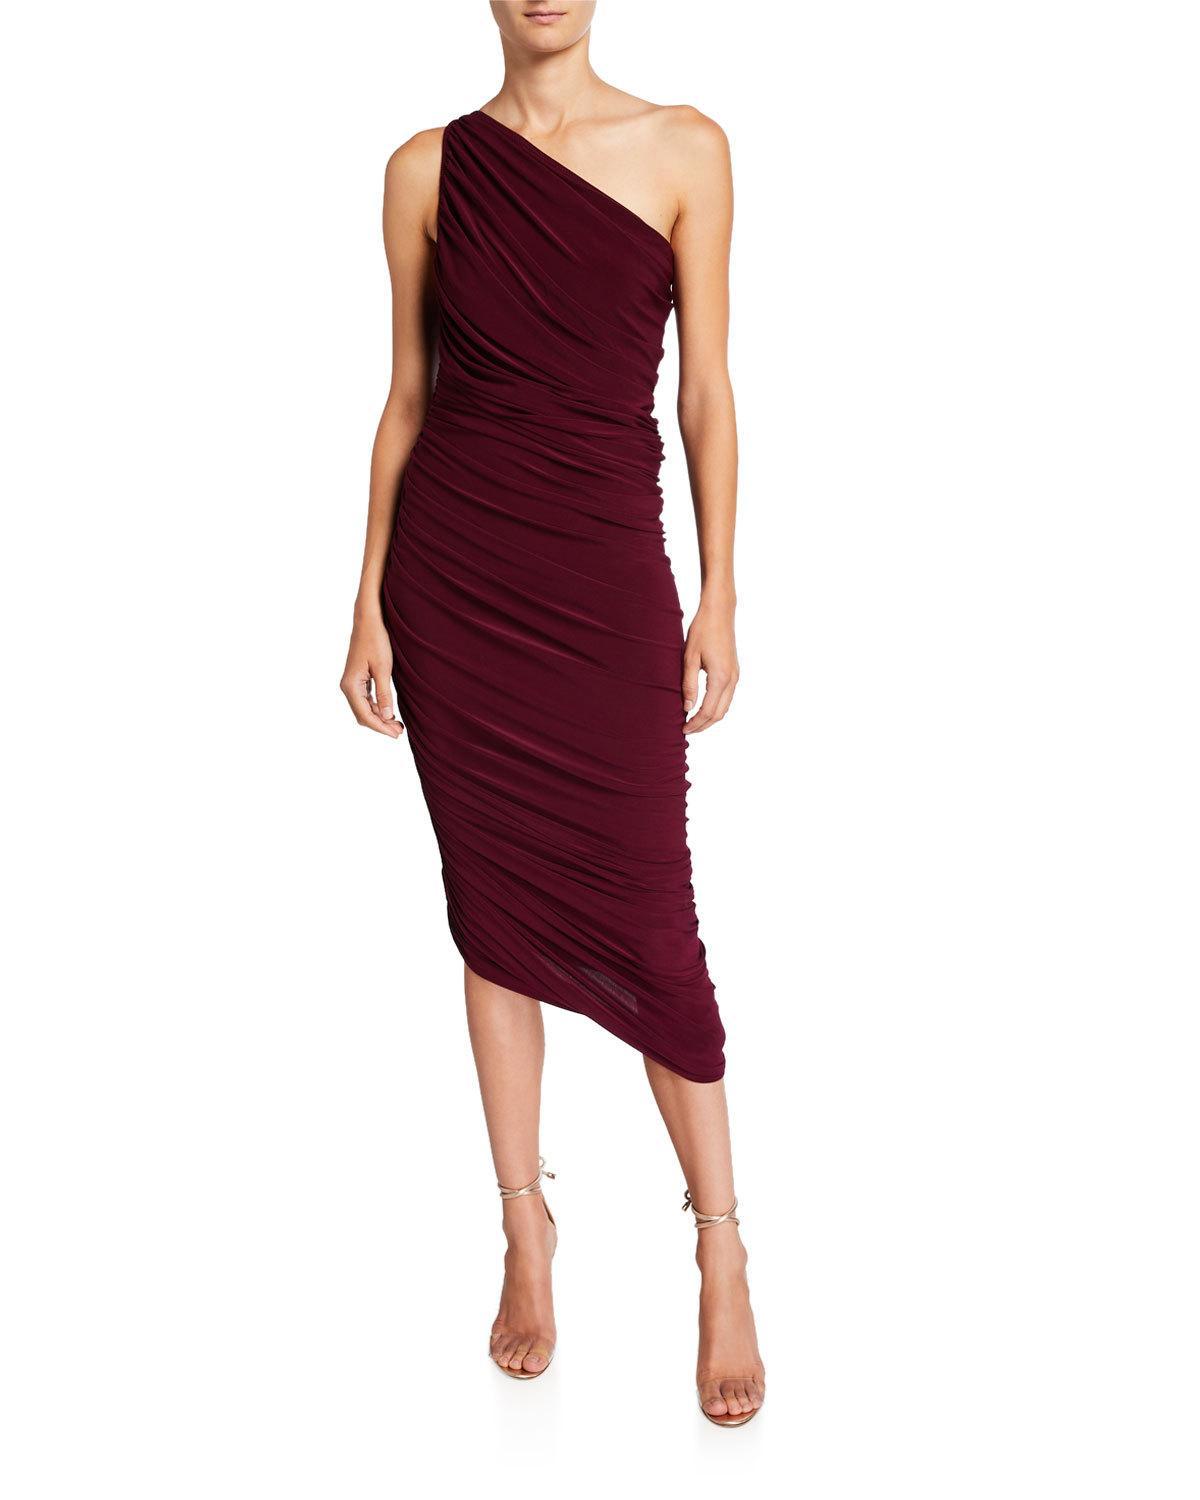 Norma Kamali Synthetic Diana 1-shoulder Stretch Dress in Plum (Red) - Lyst